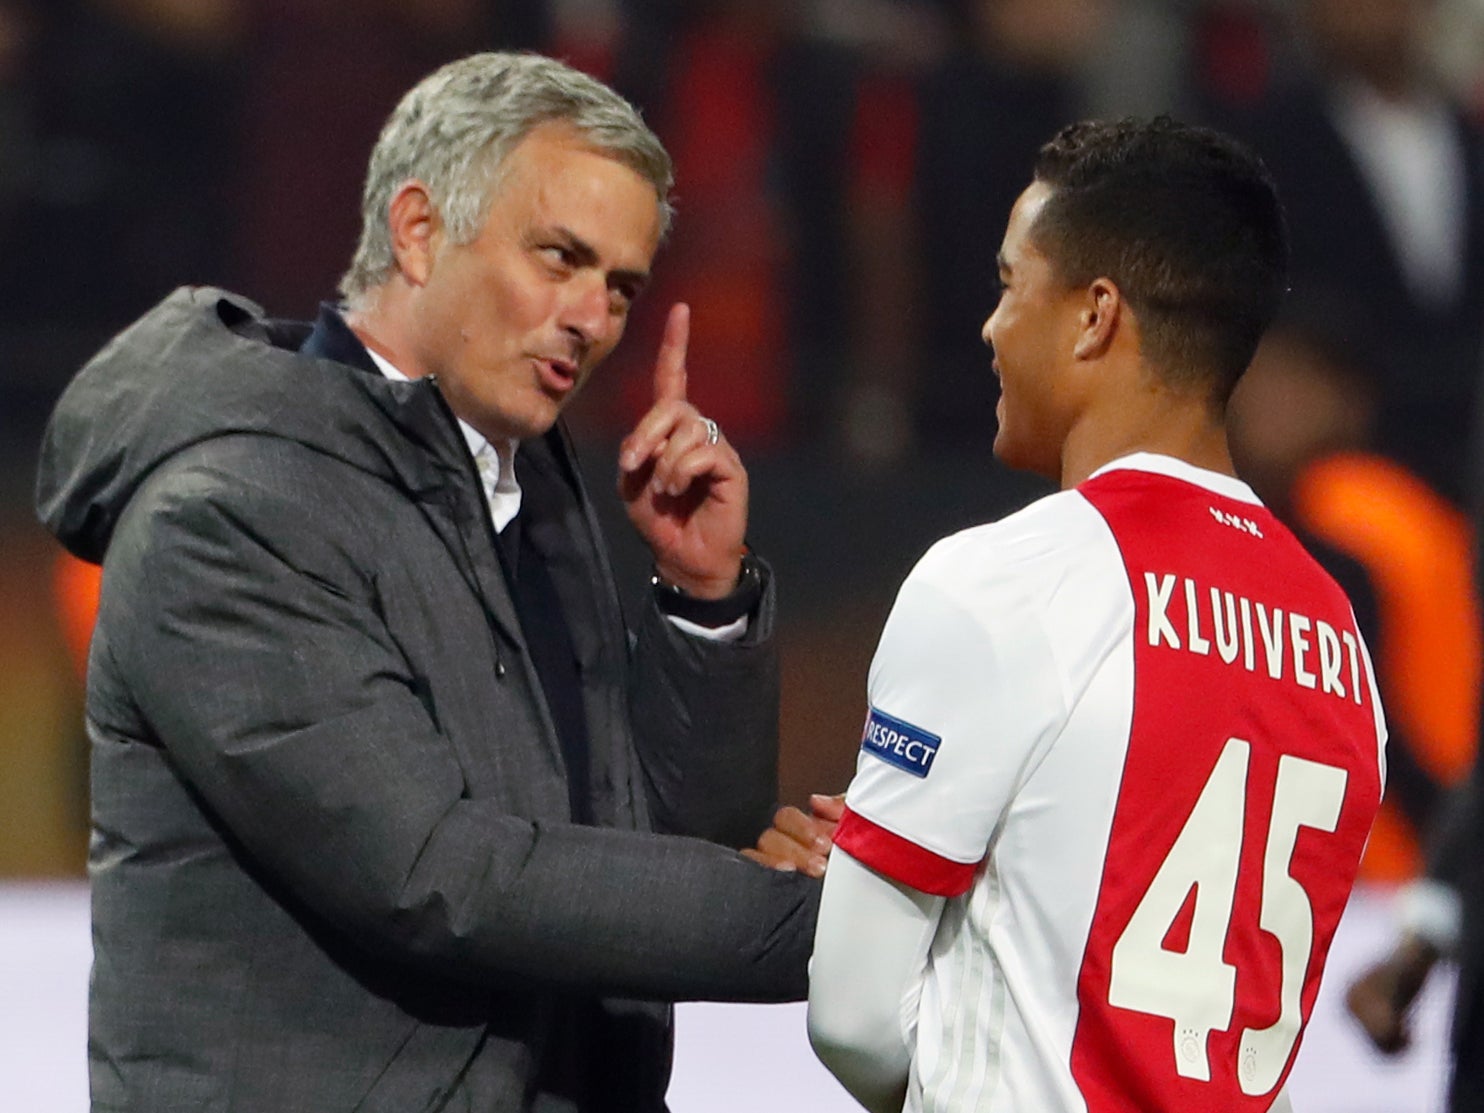 Dutch legend Patrick Kluivert reveals why his son Justin rejected a summer transfer to Manchester United